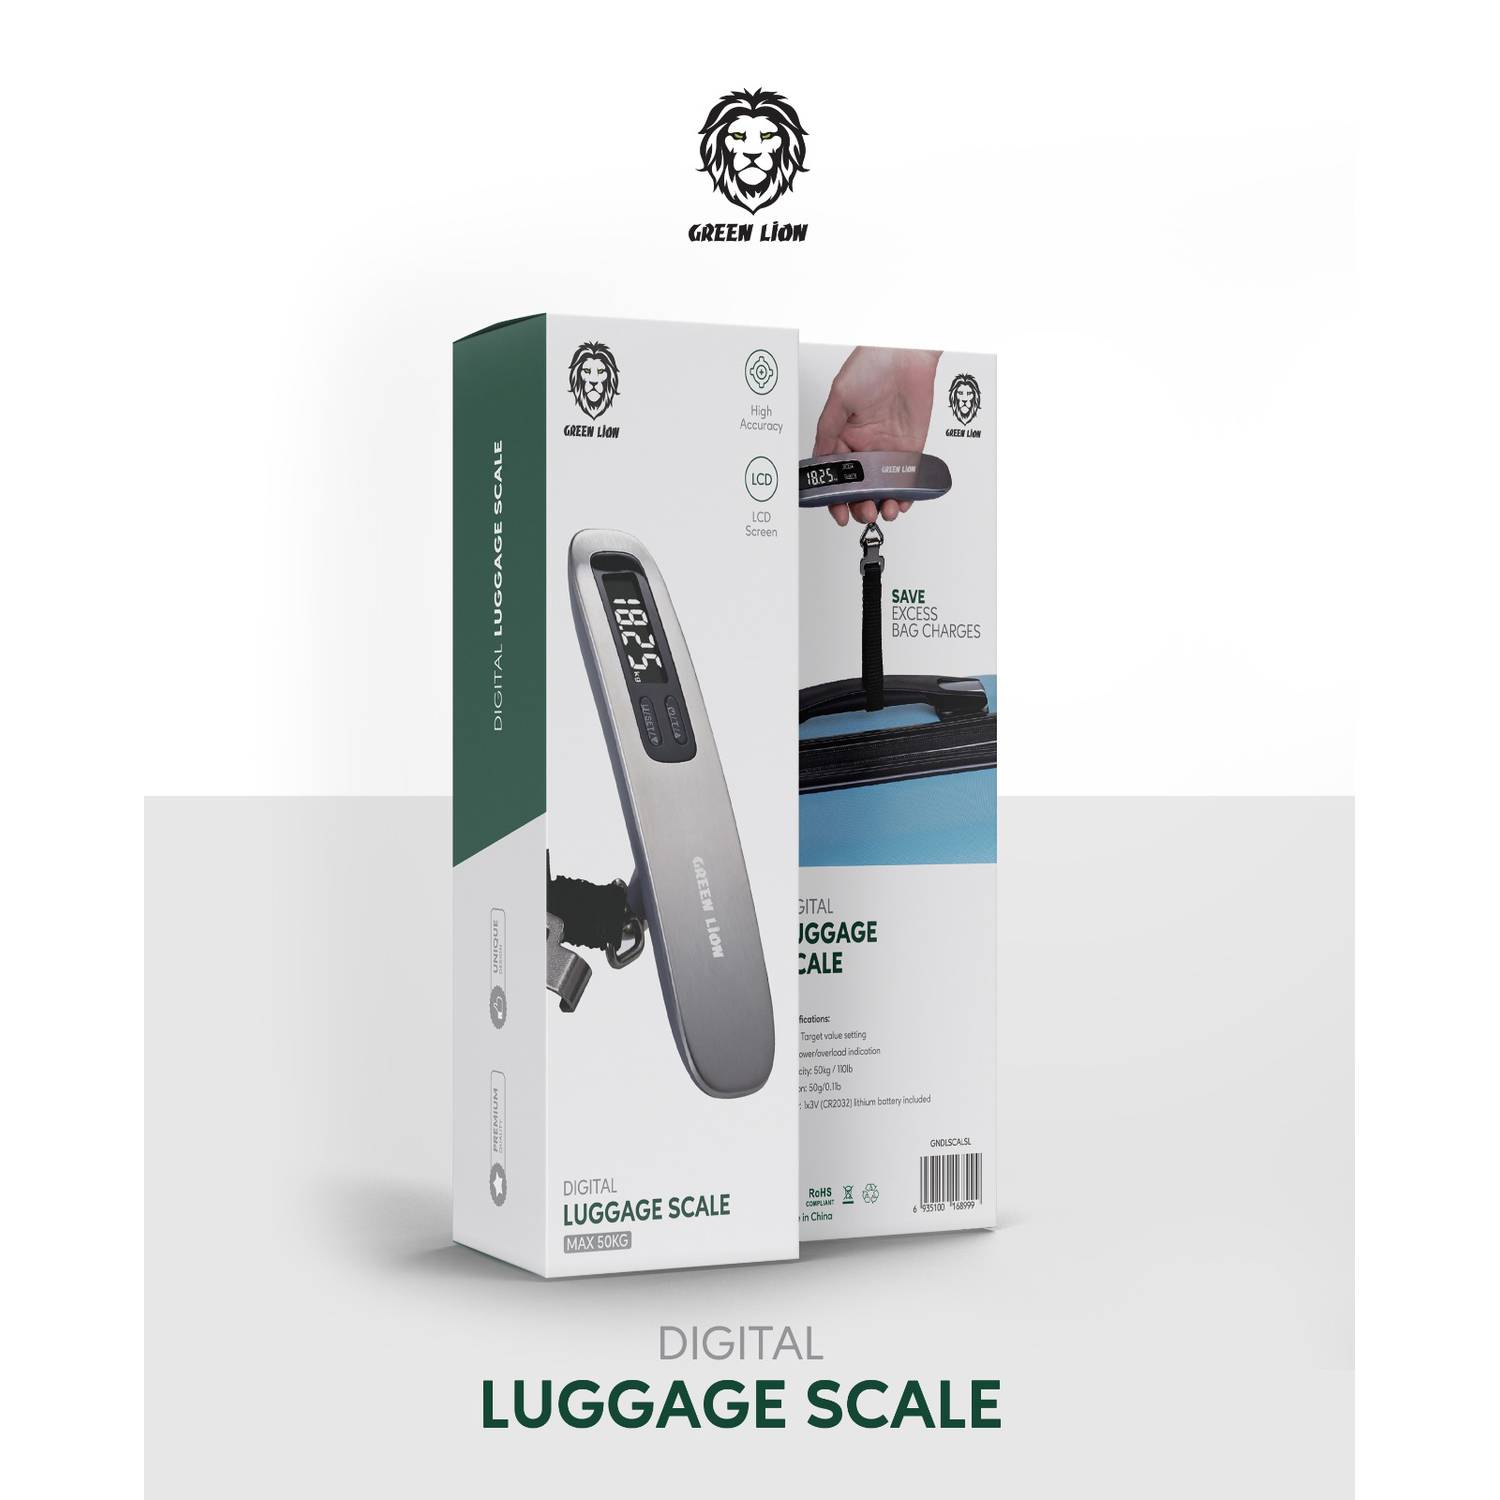 Digital Luggage Weight Scale 50kg High Precision Portable